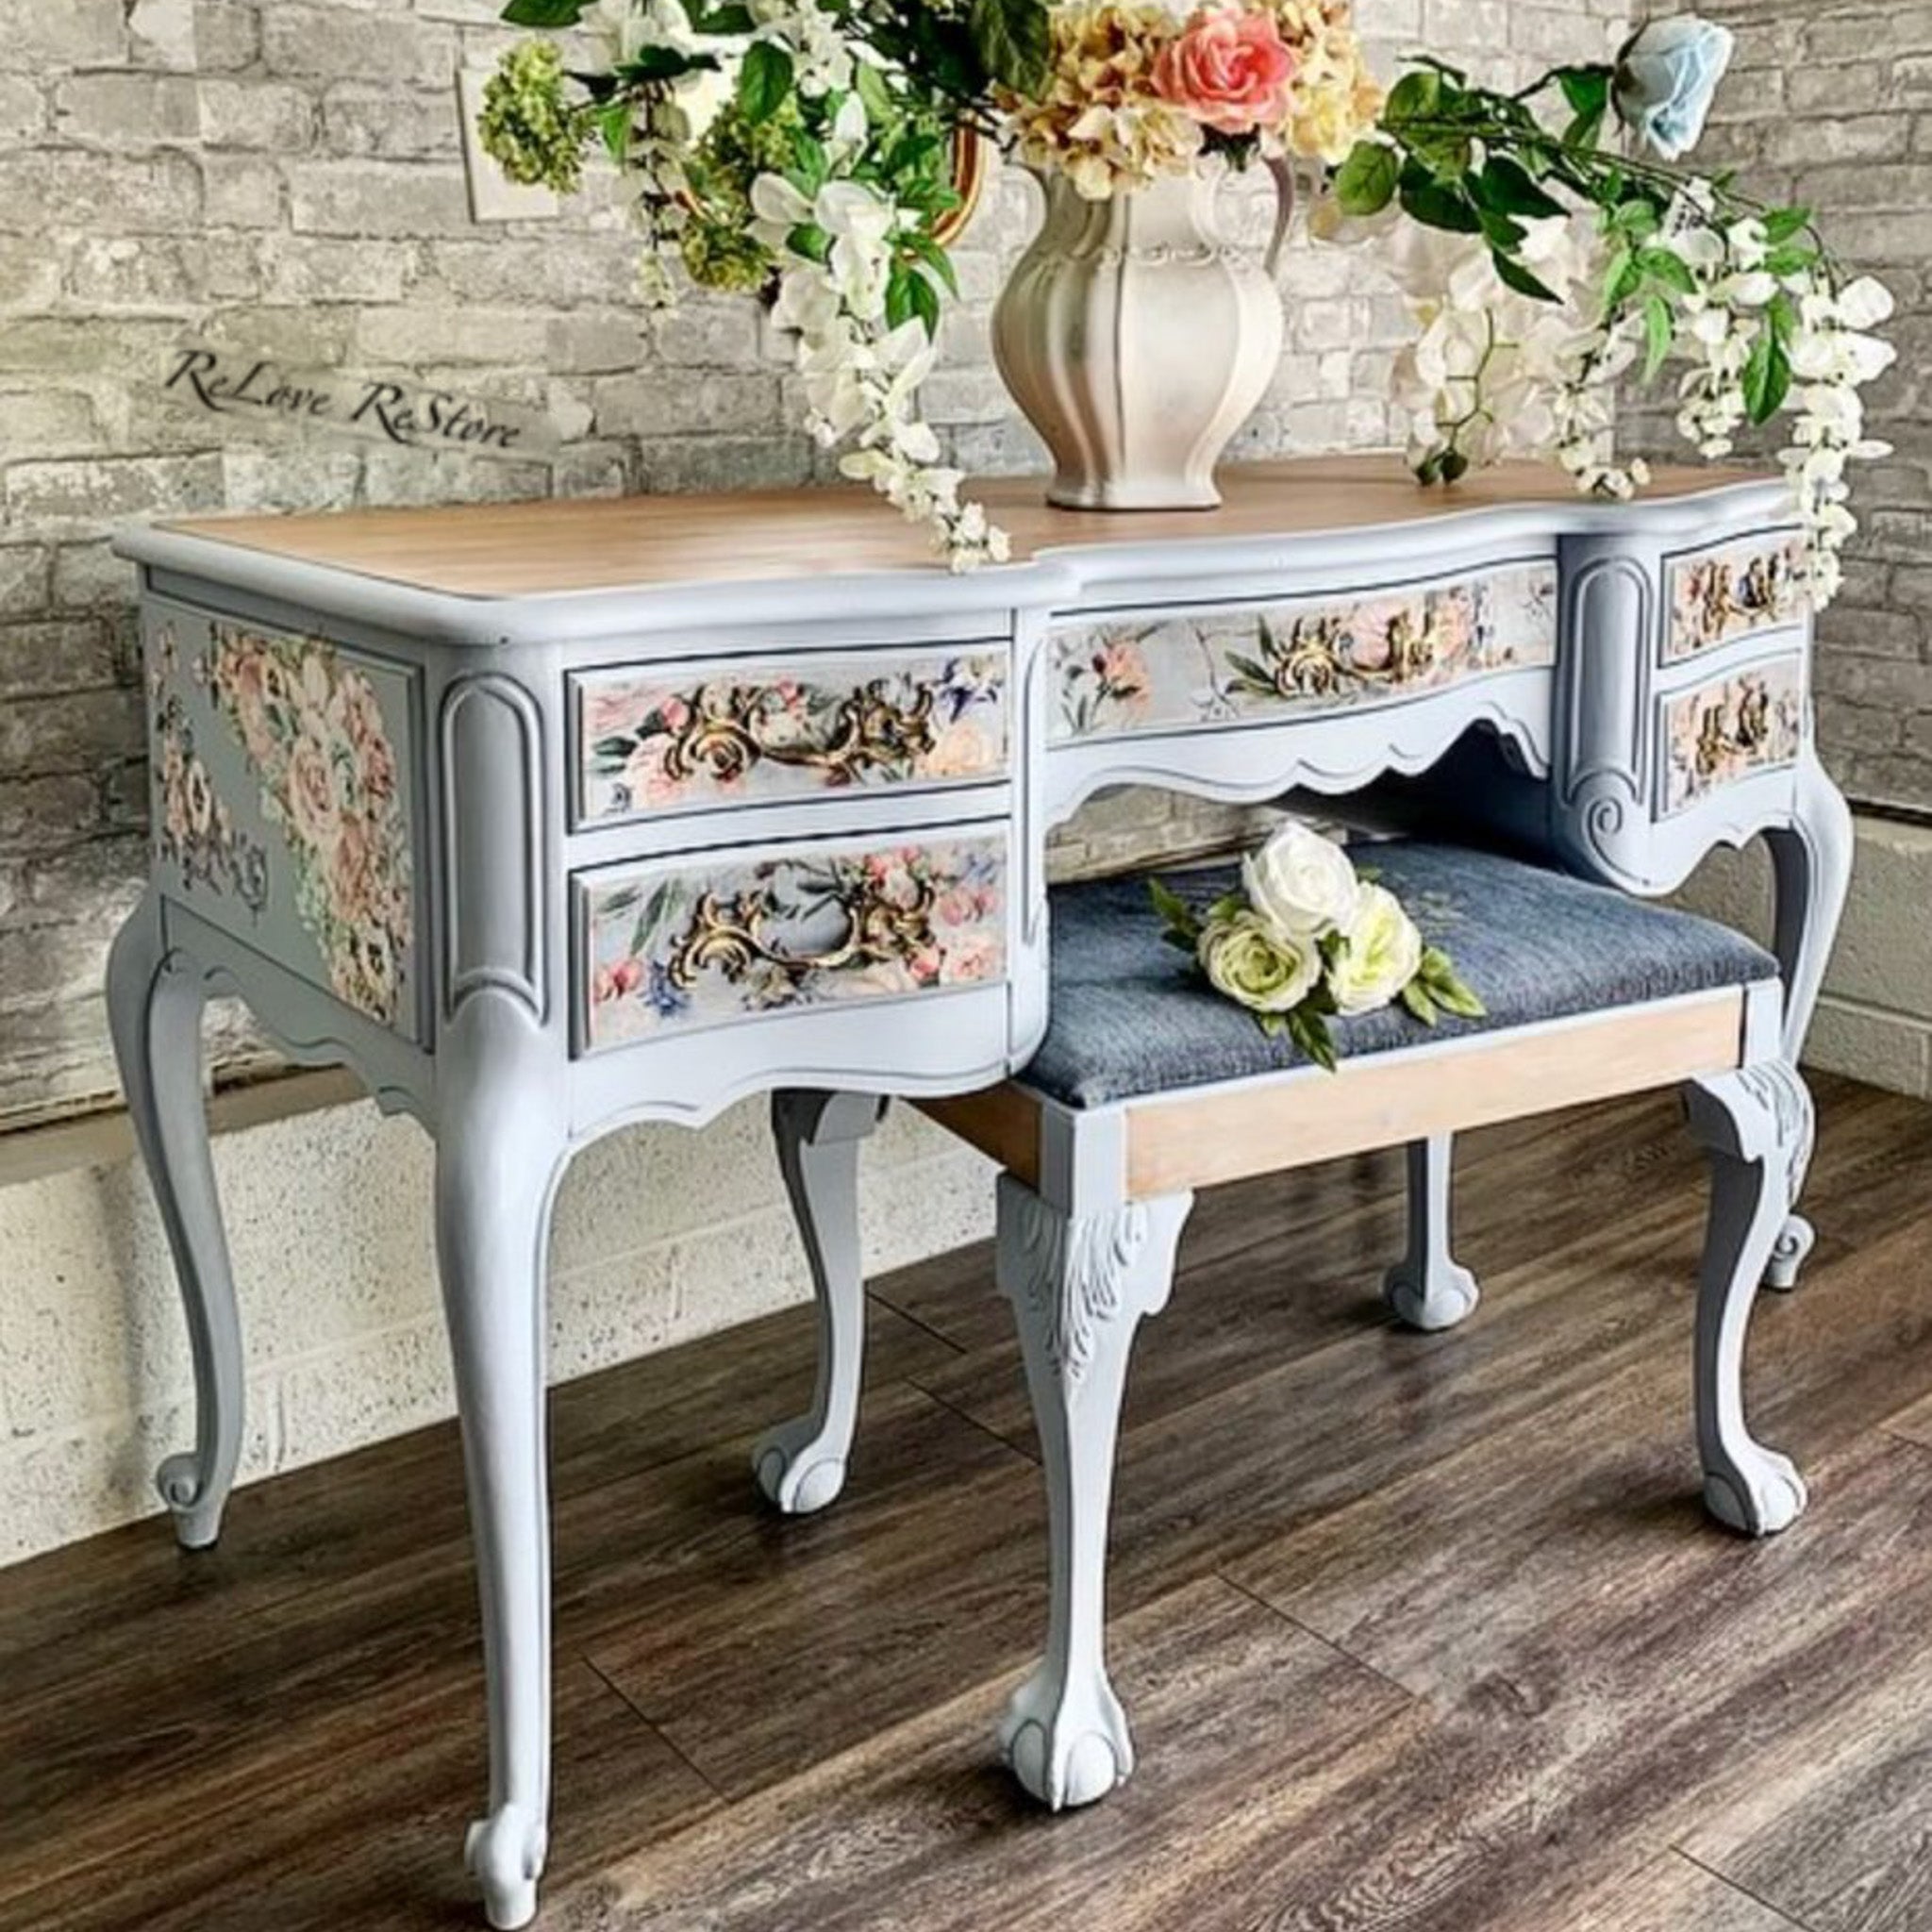 A vintage vanity desk refurbished by ReLove ReStore is painted pale blue and features the Lavender Fleur tissue paper on it.